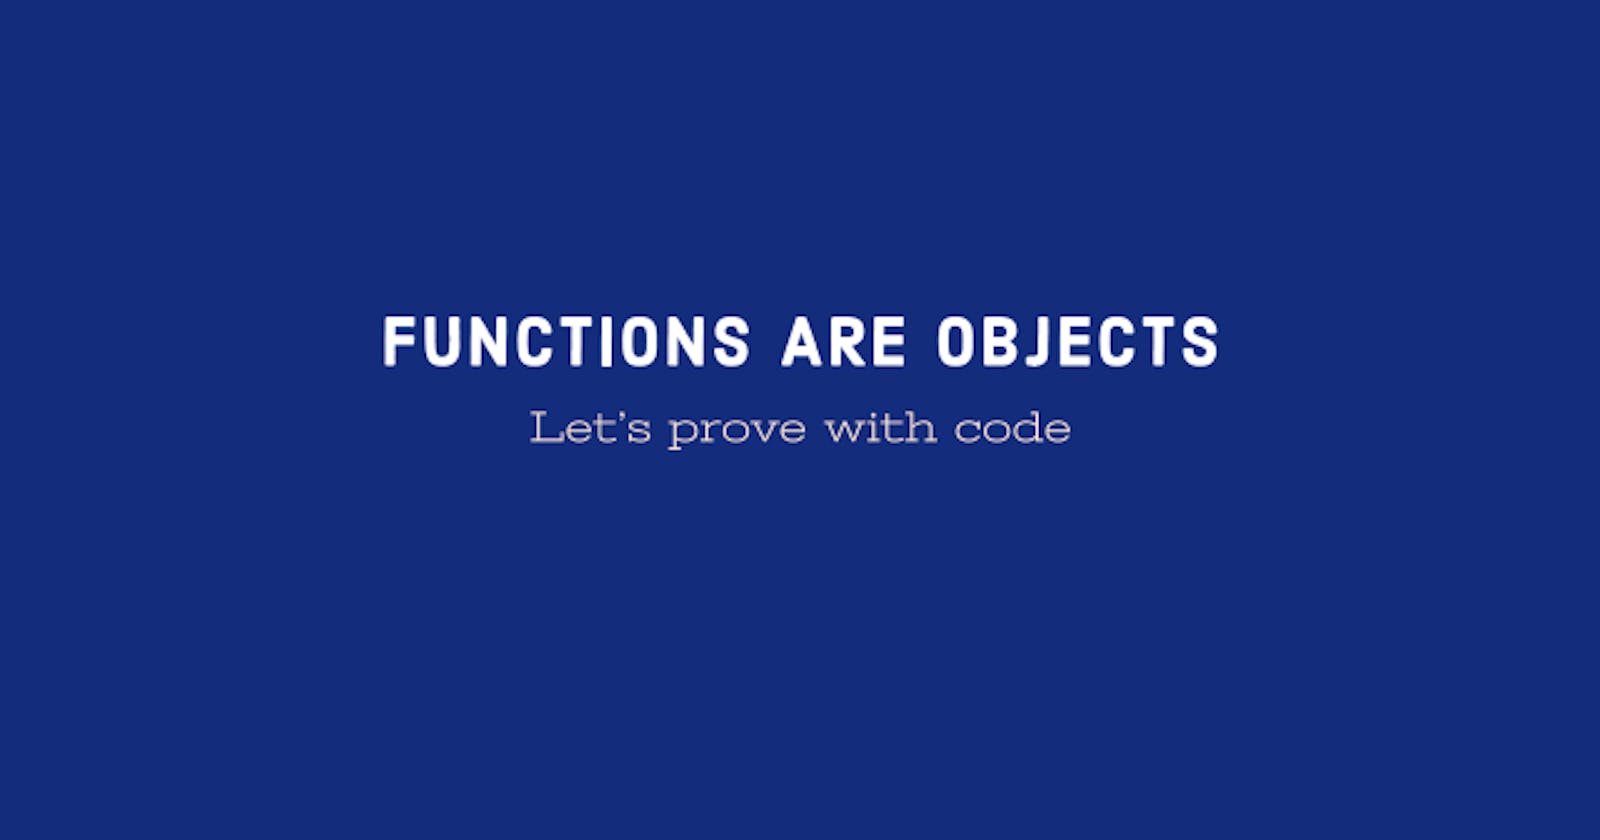 Functions are objects in JavaScript, let's prove it!